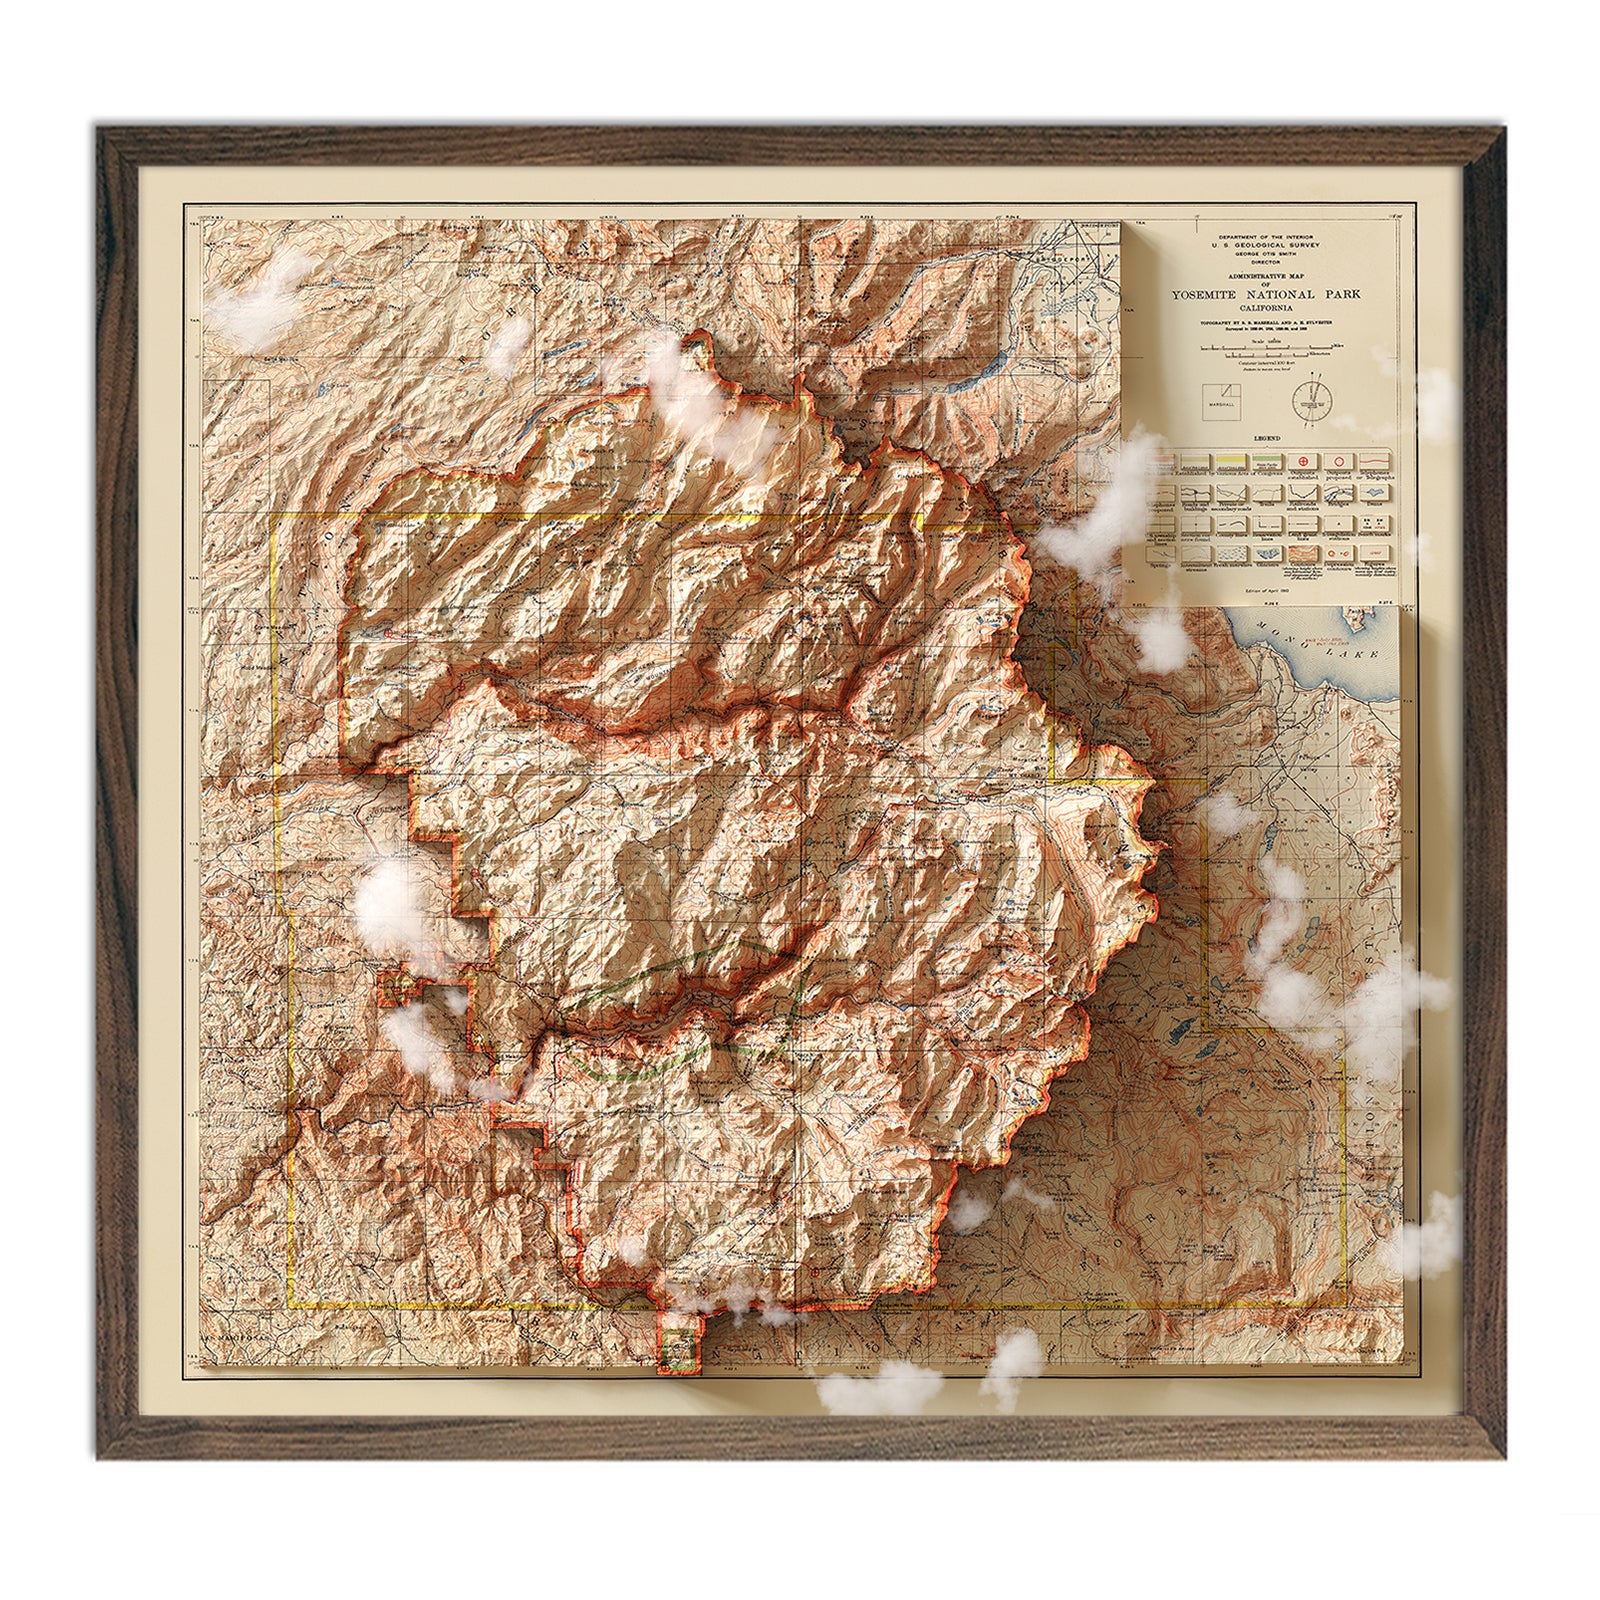 Vintage Relief Map of Yosemite National Park - 1910